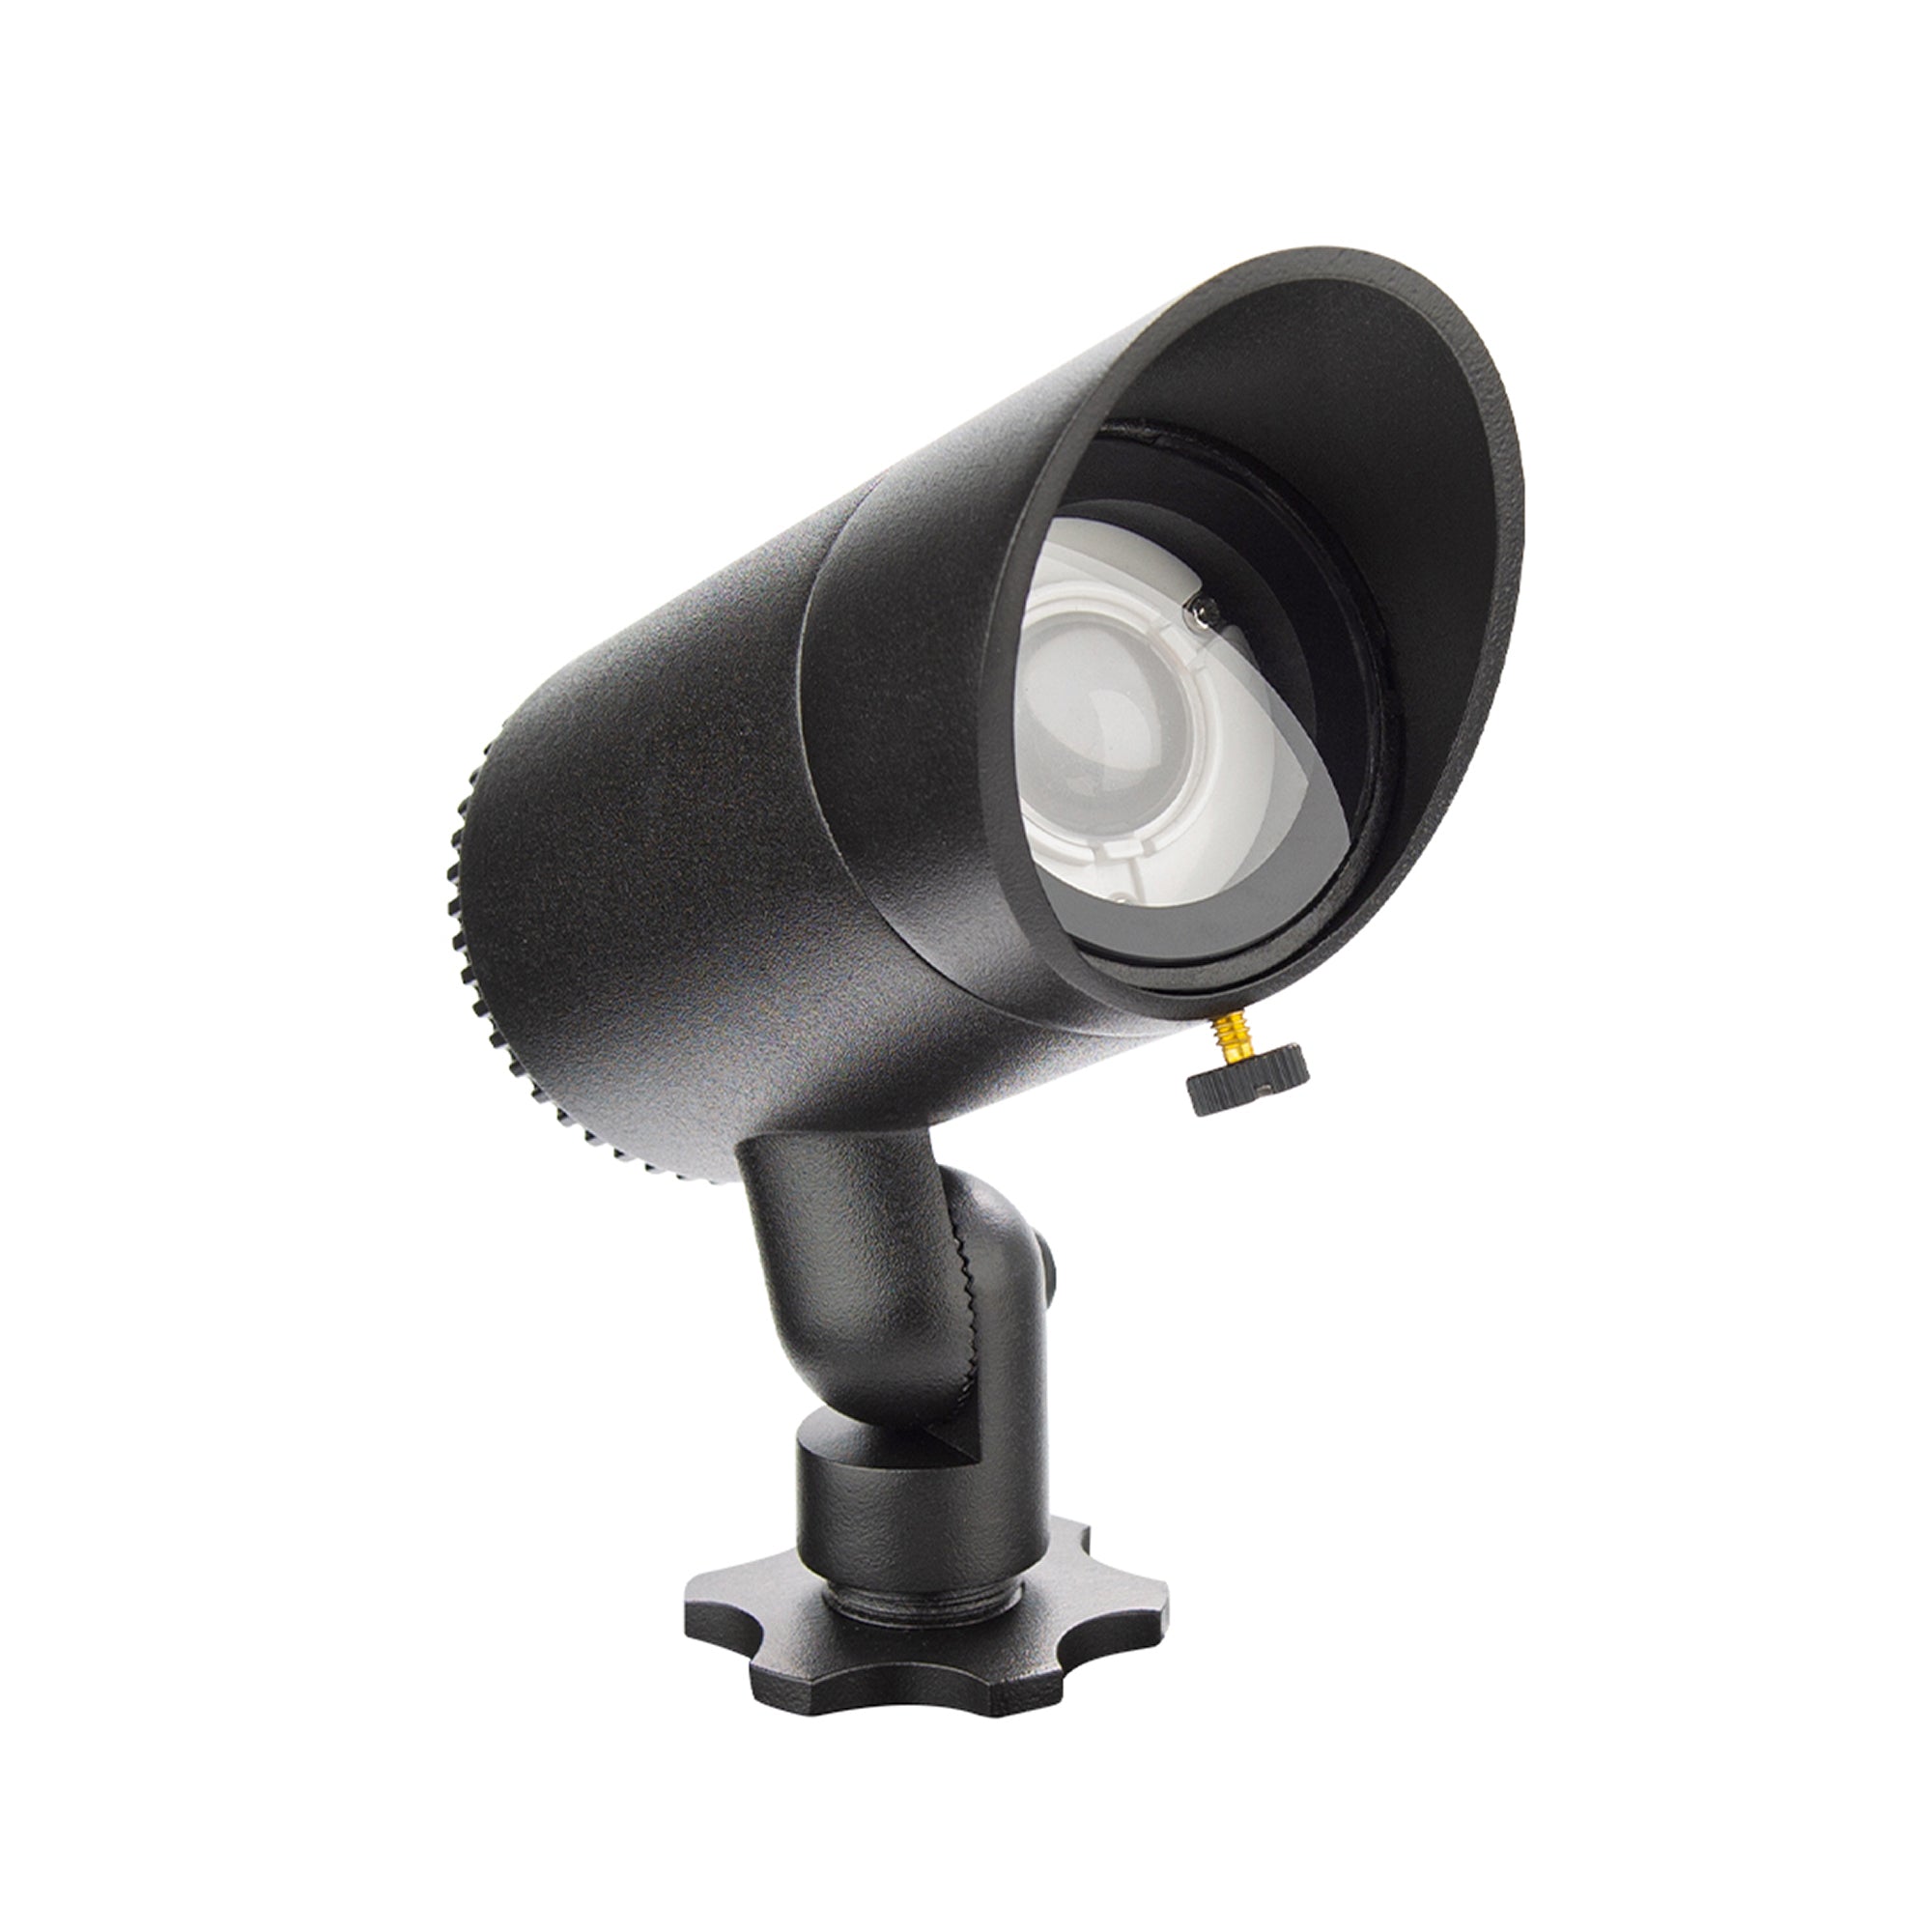 LED 12V Interbeam Accent Light Adjustable Beam and Output 6W